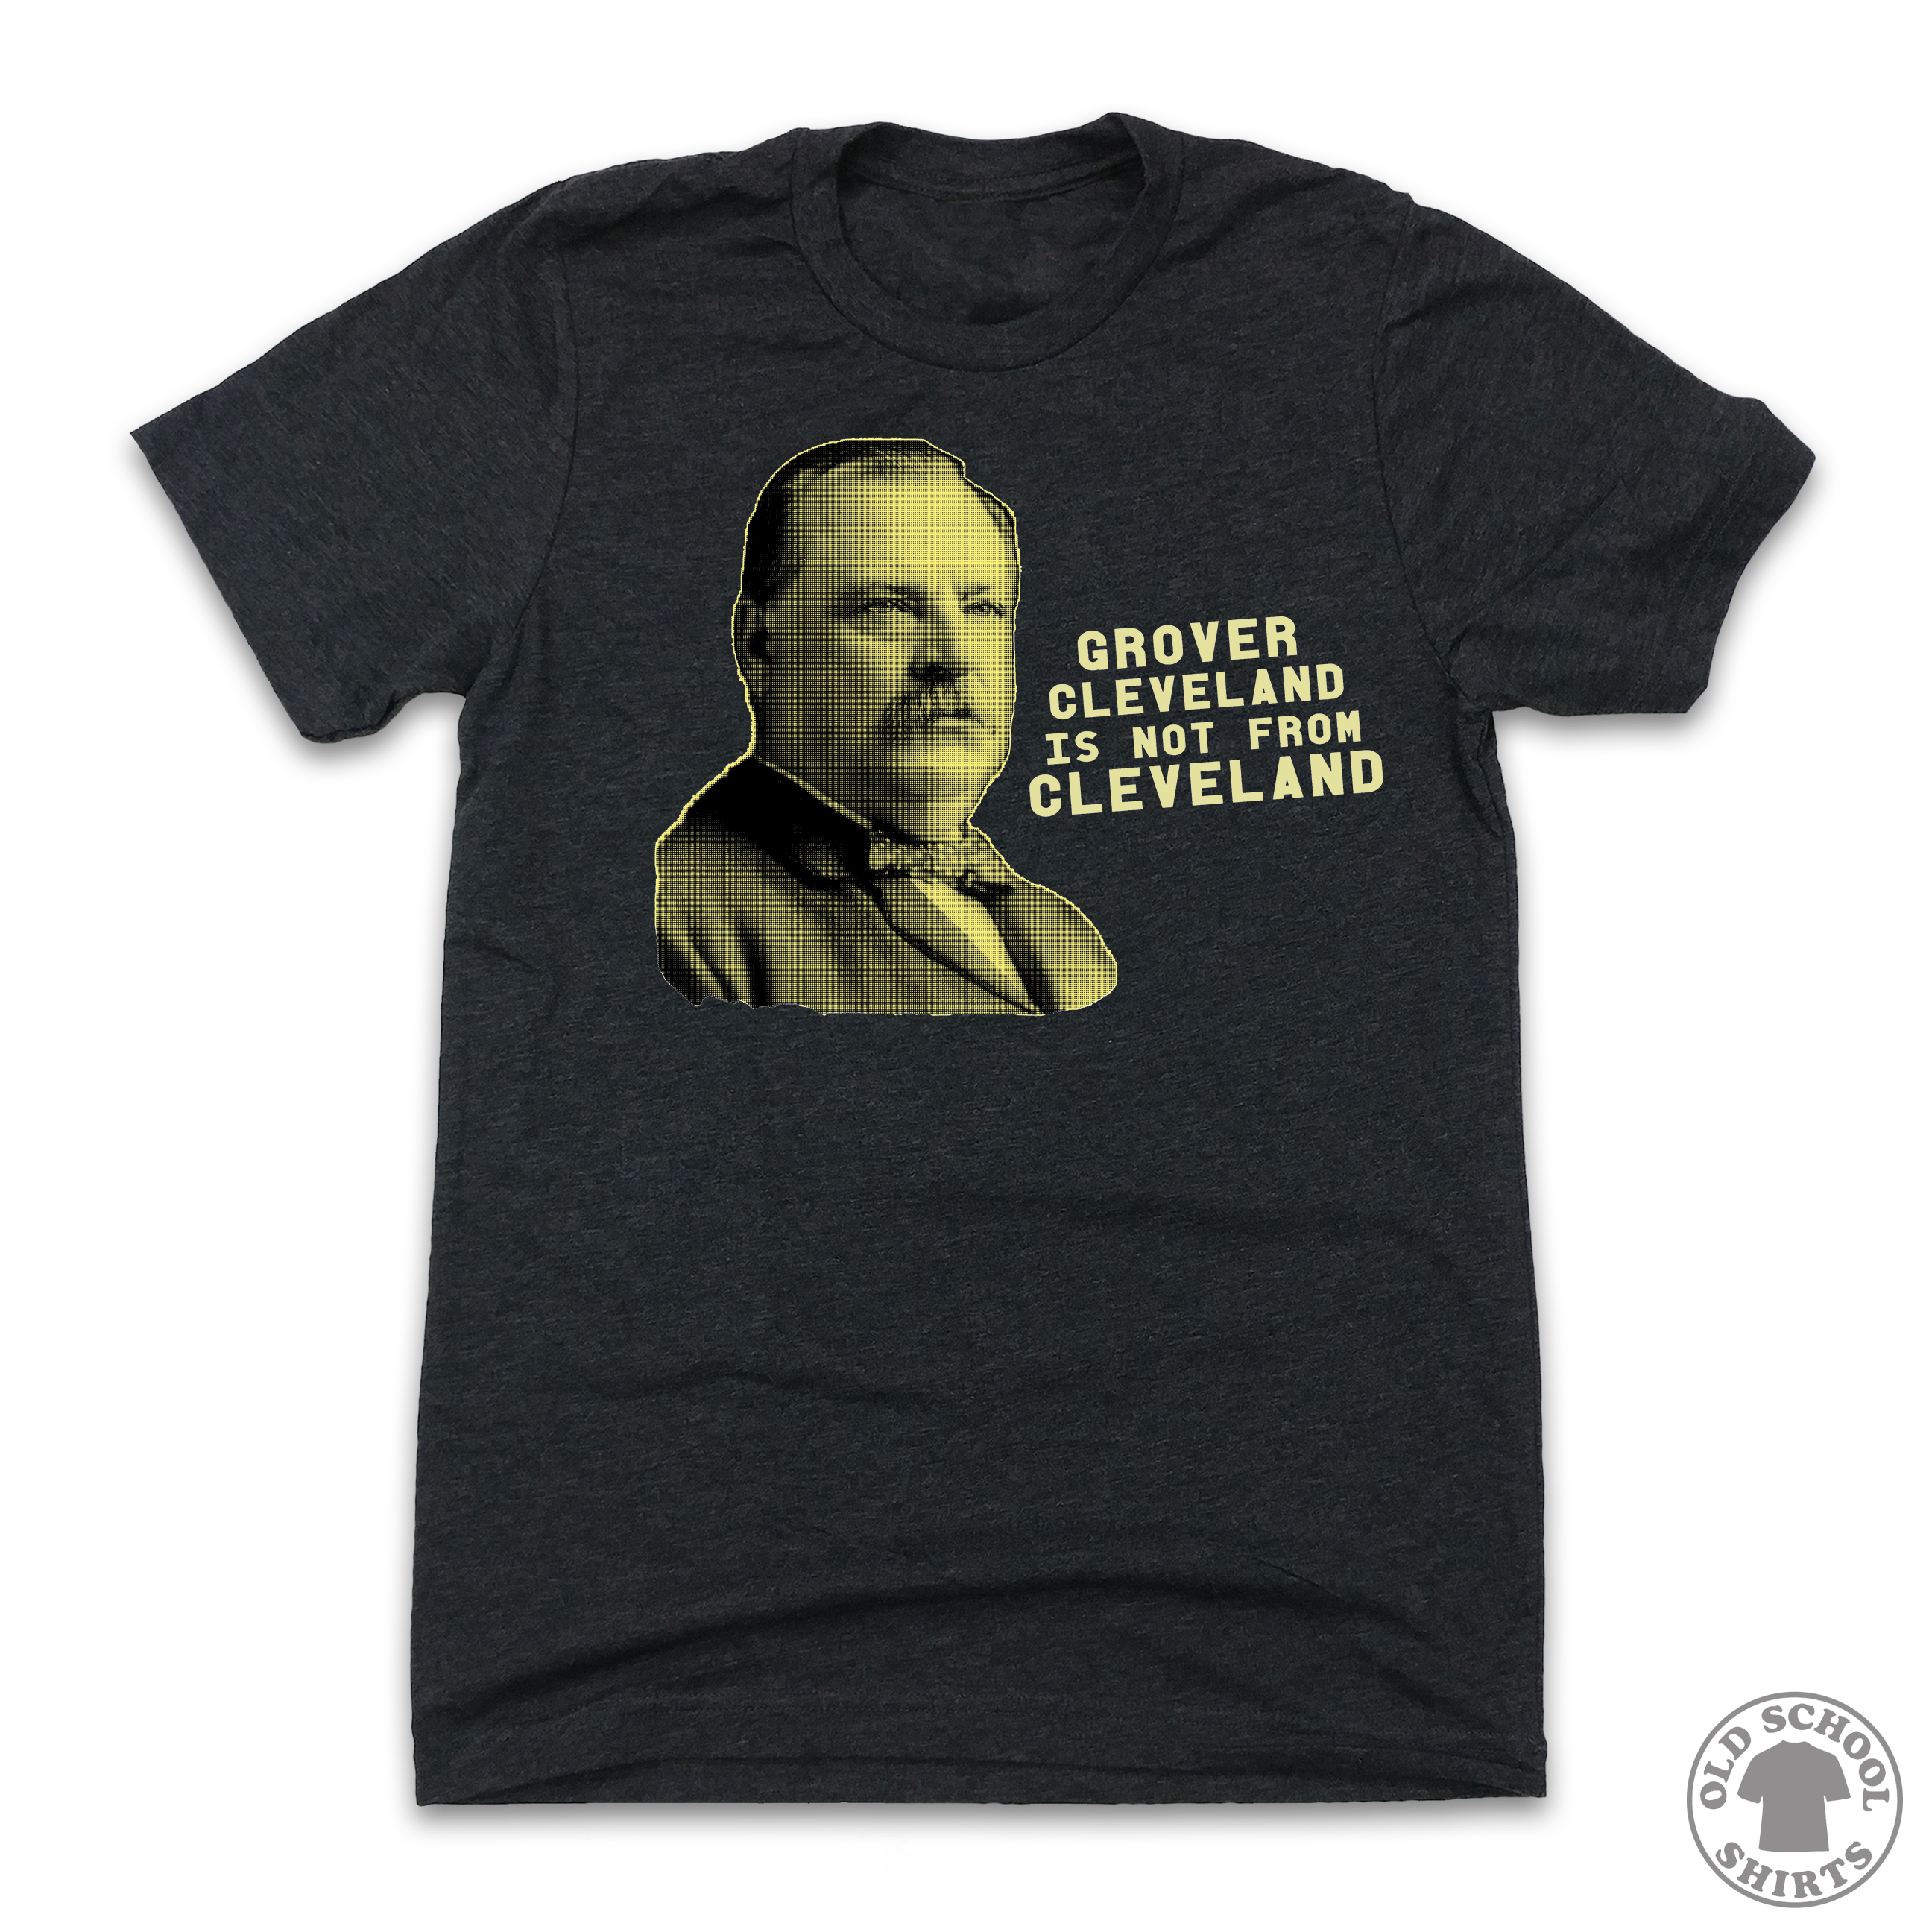 Grover Cleveland Is Not From Cleveland - Old School Shirts- Retro Sports T Shirts